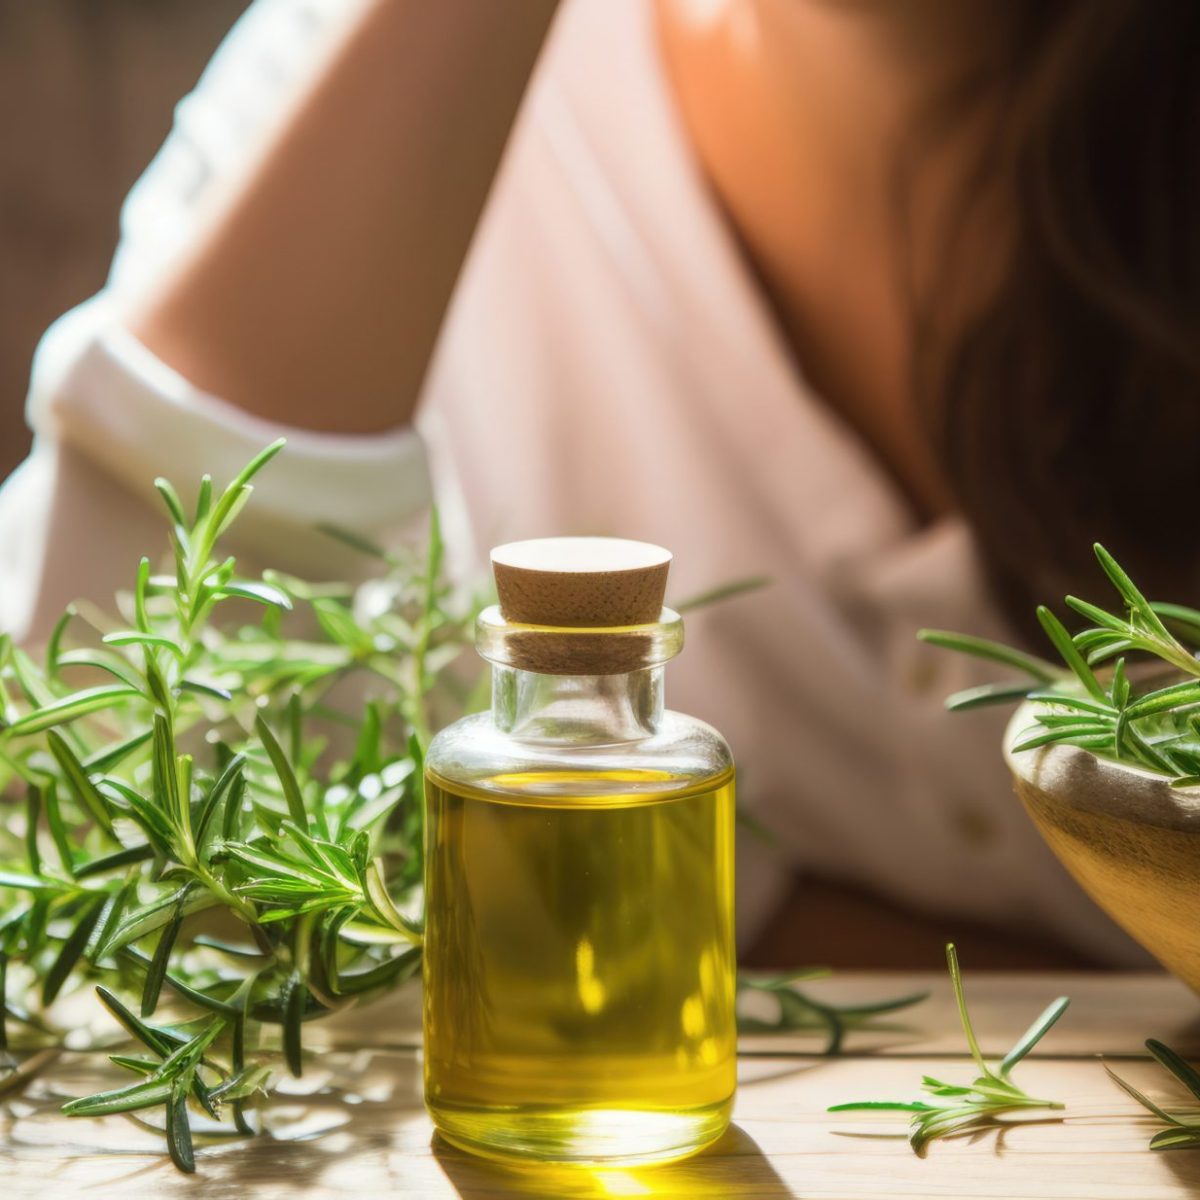 fragrant medicinal evergreen rosemary oil help with hair loss. rosemary oil jar on a wooden background